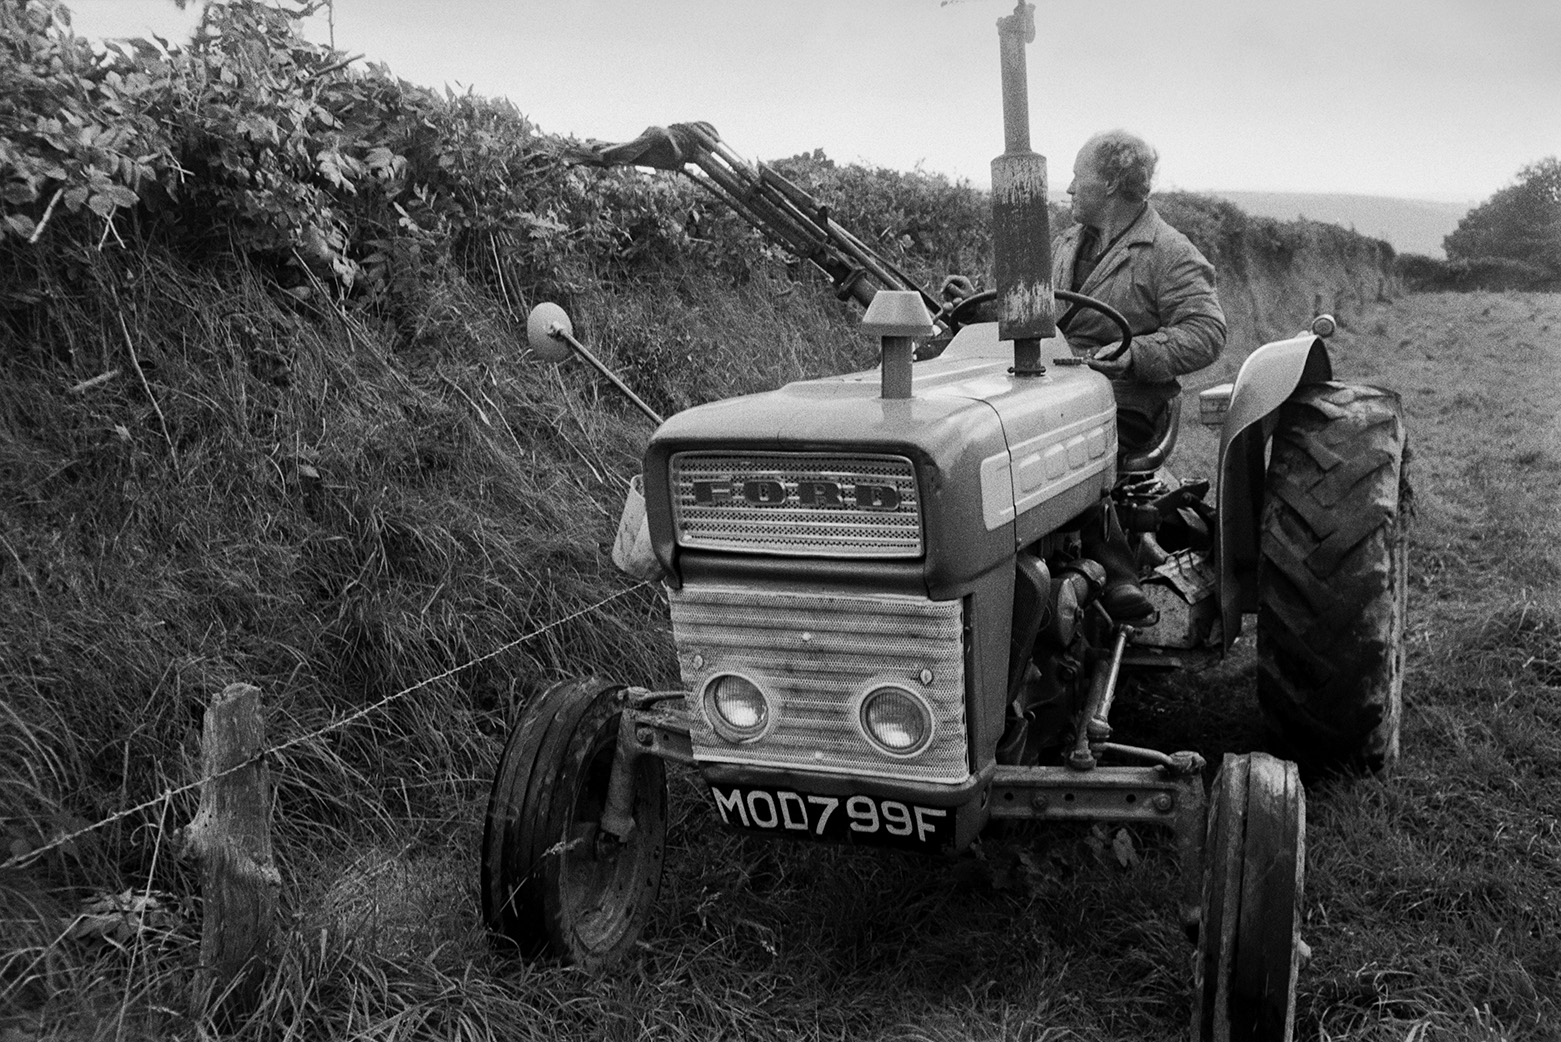 A man cutting a hedge along the edge of a field in Beaford, using a tractor and hedge trimmer.